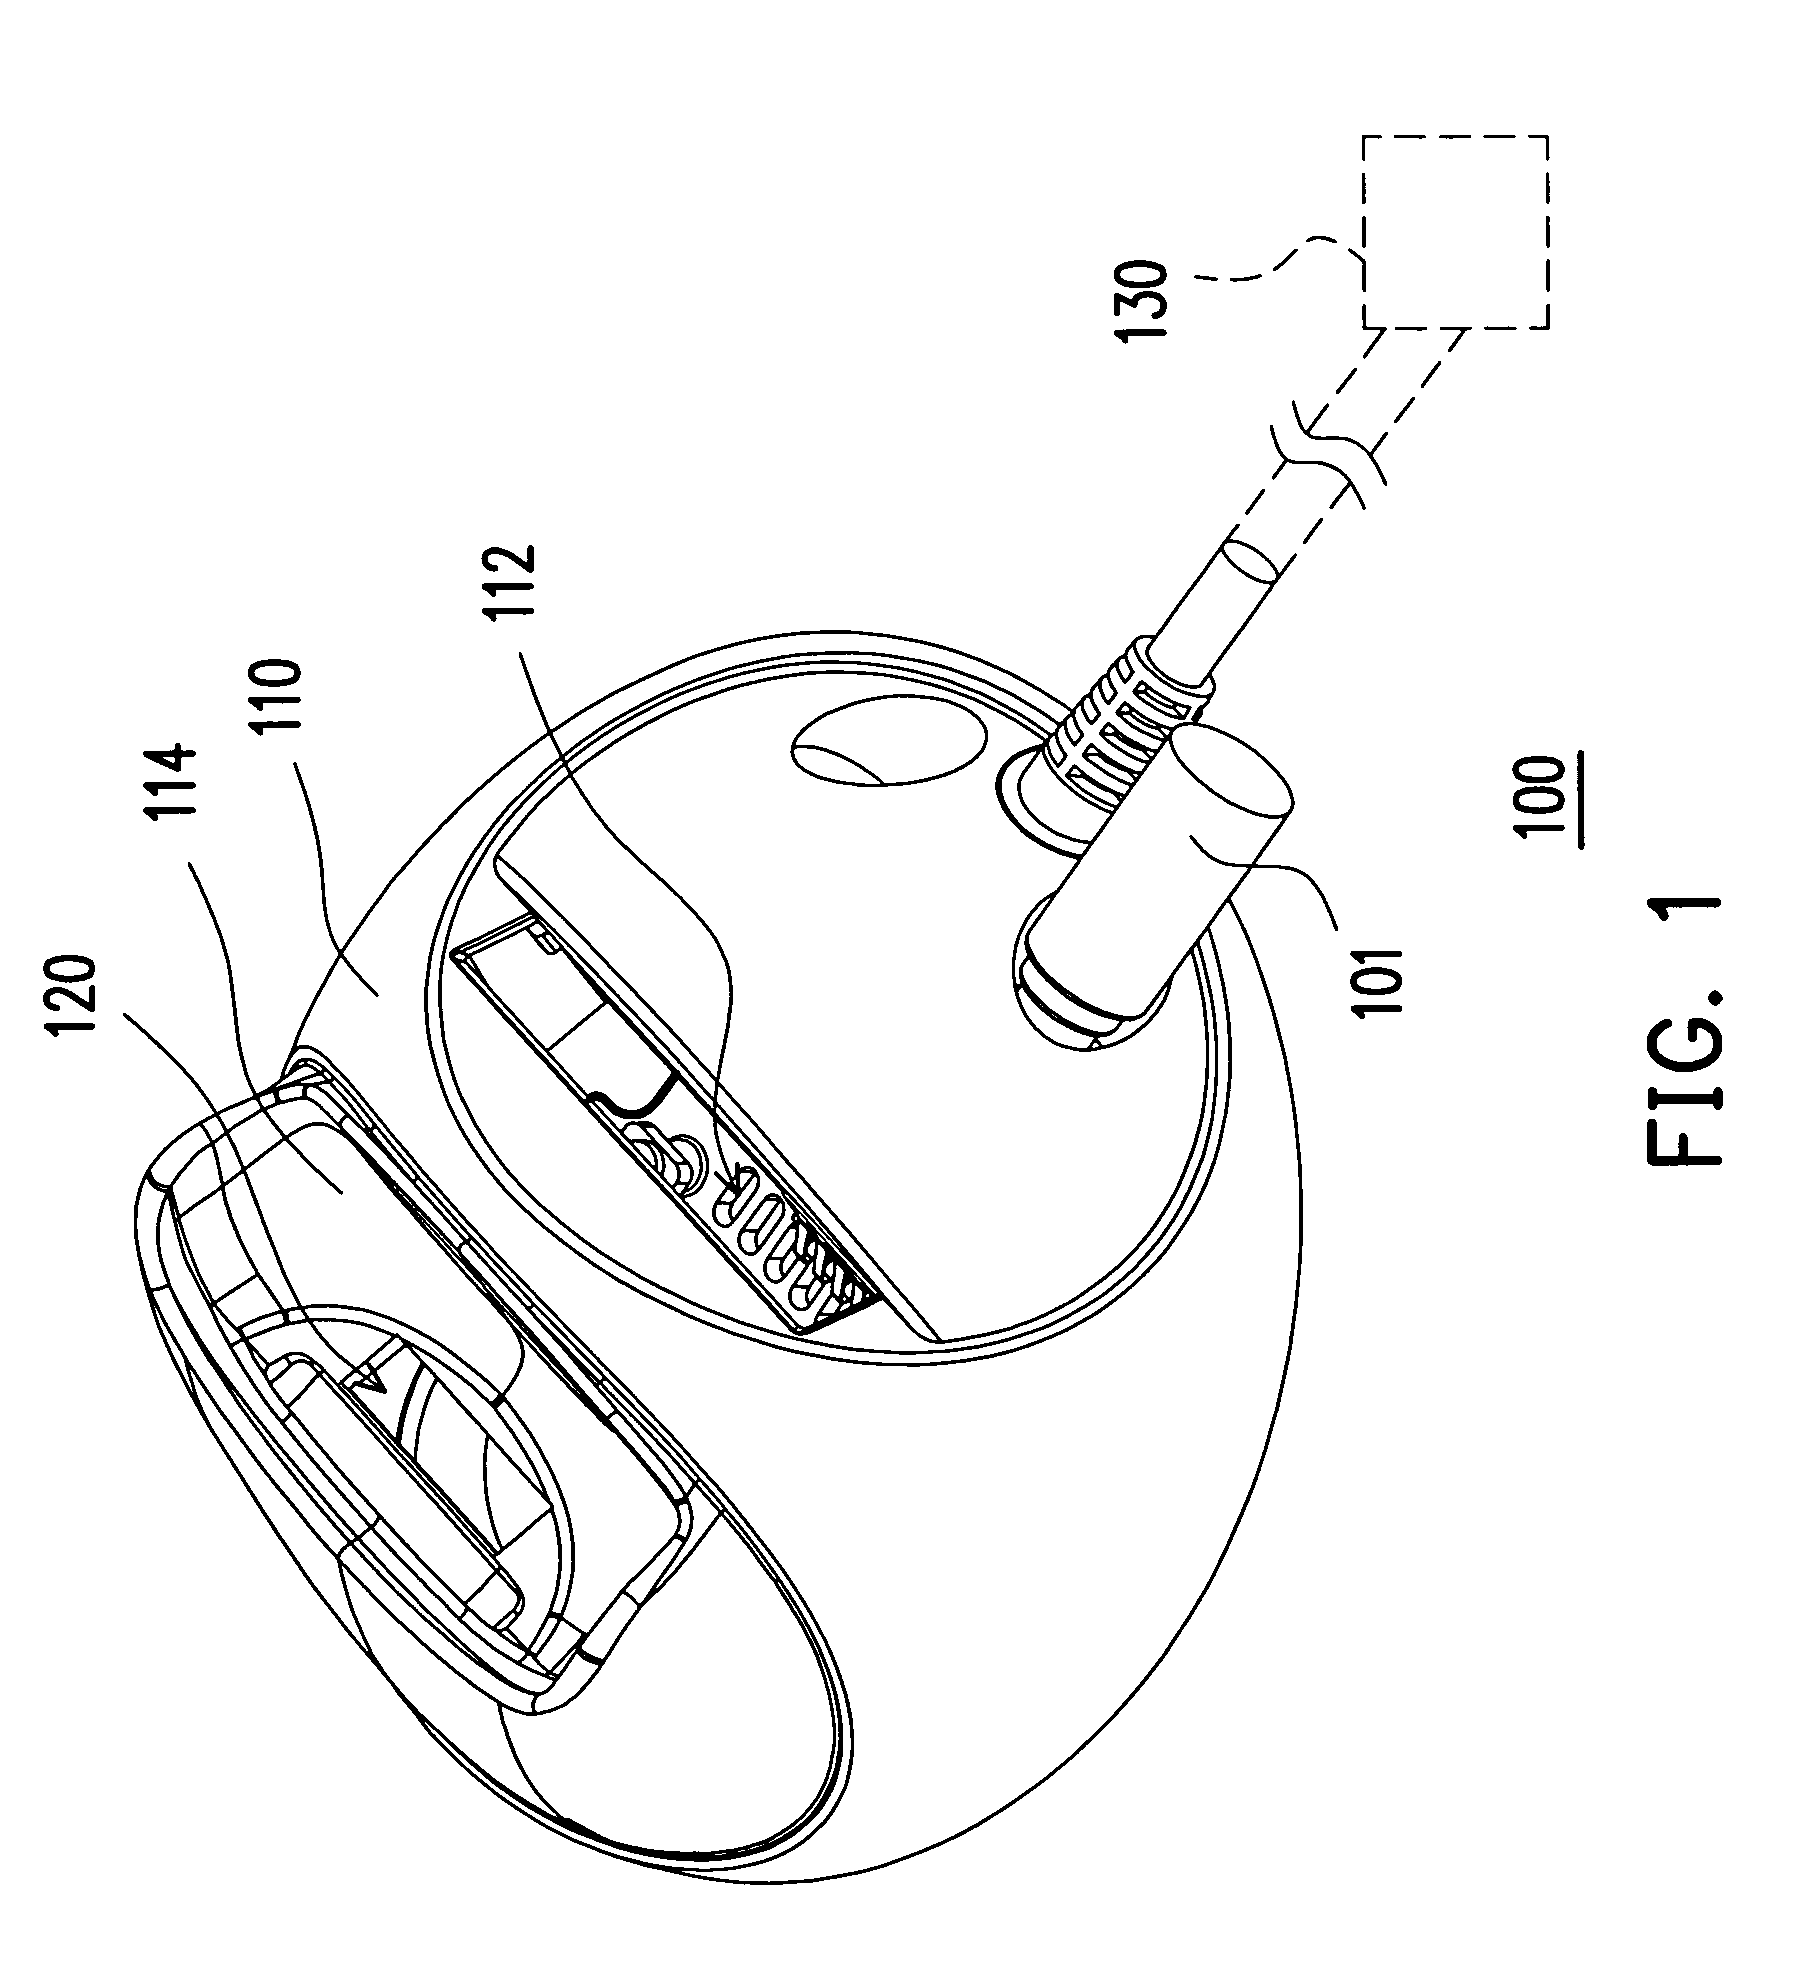 Handheld electronic device cradle with enhanced heat-dissipating capability